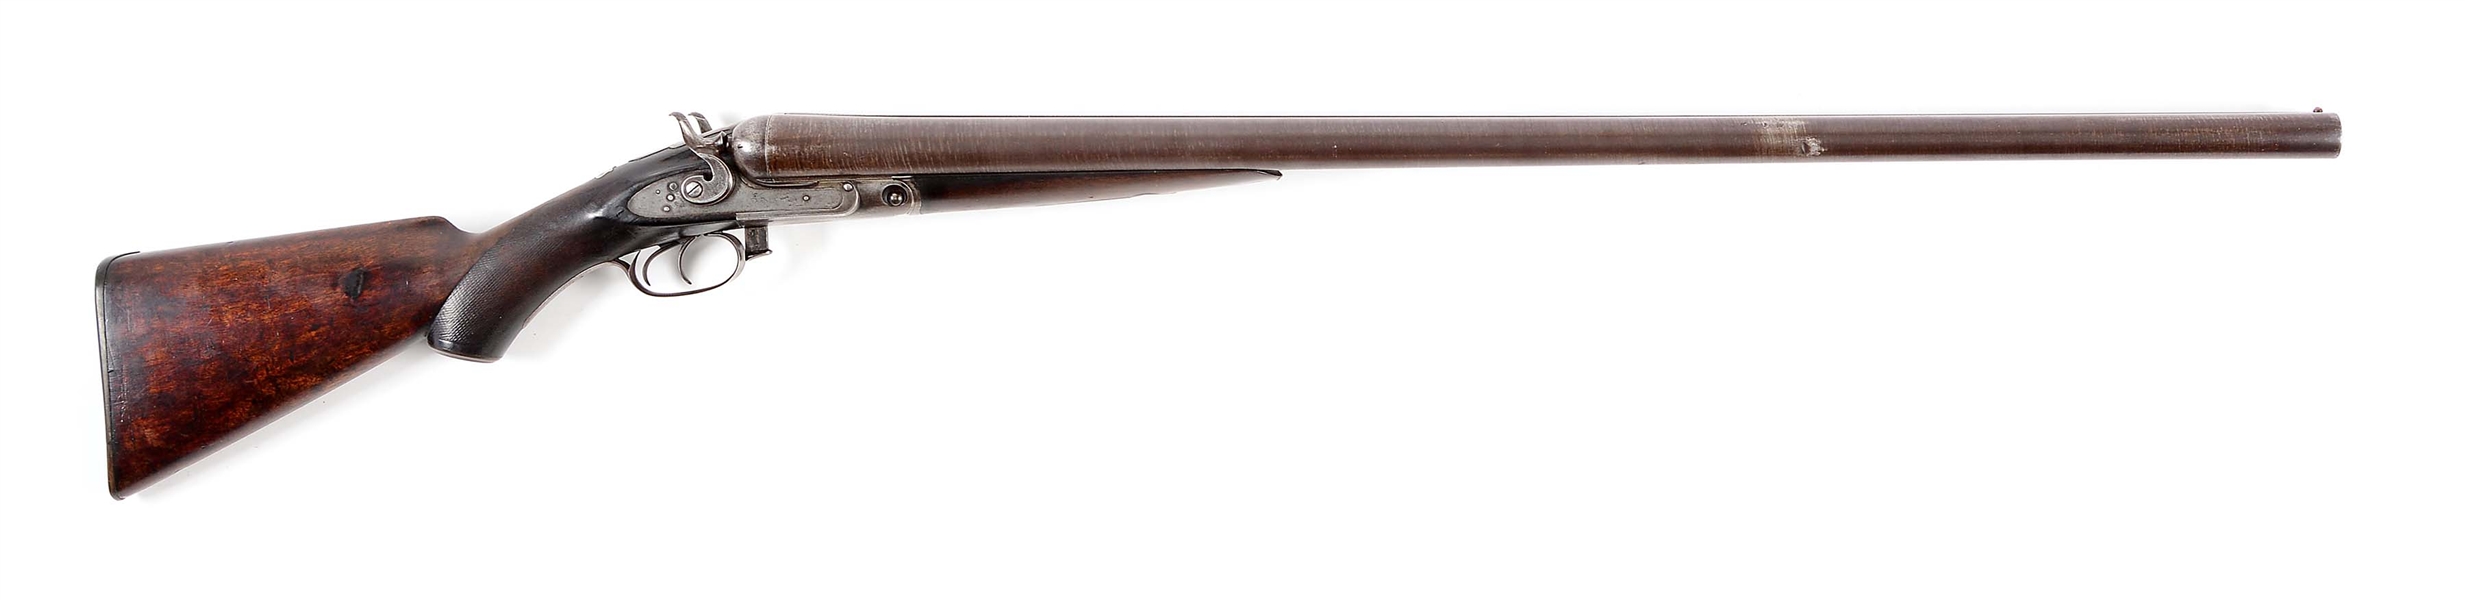 (A) BEASTLY AND EXTREMELY LATE LIFTER MODEL NO. 7 FRAME PARKER HAMMER 8 BORE DOUBLE BARREL SHOTGUN (1894).